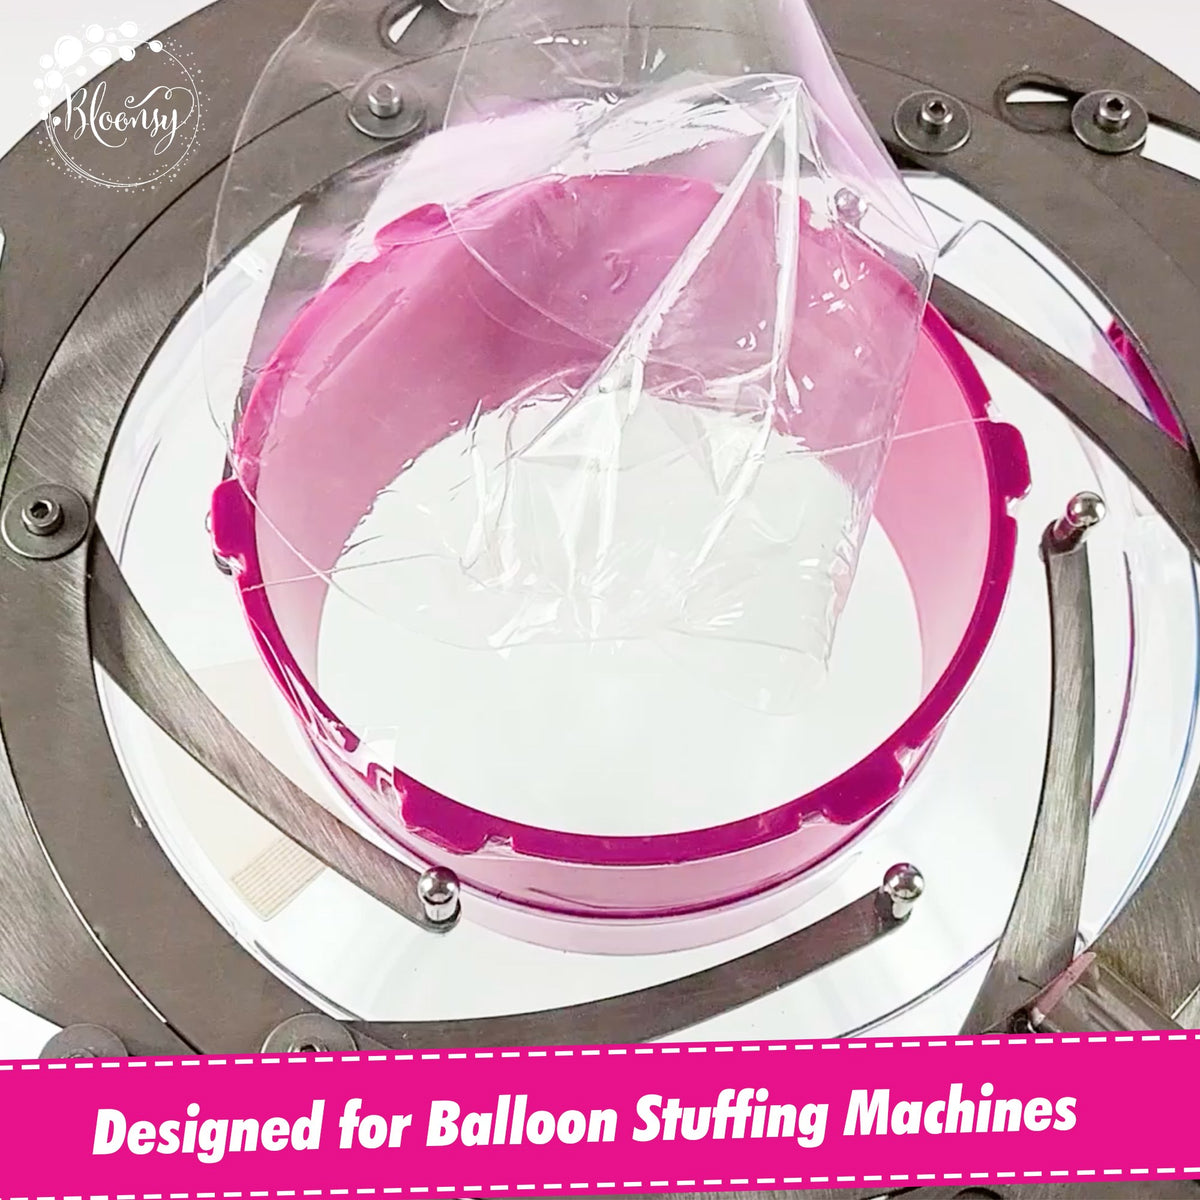 YESyou can use the wide neck #boboballoon with your stuffing machine. 